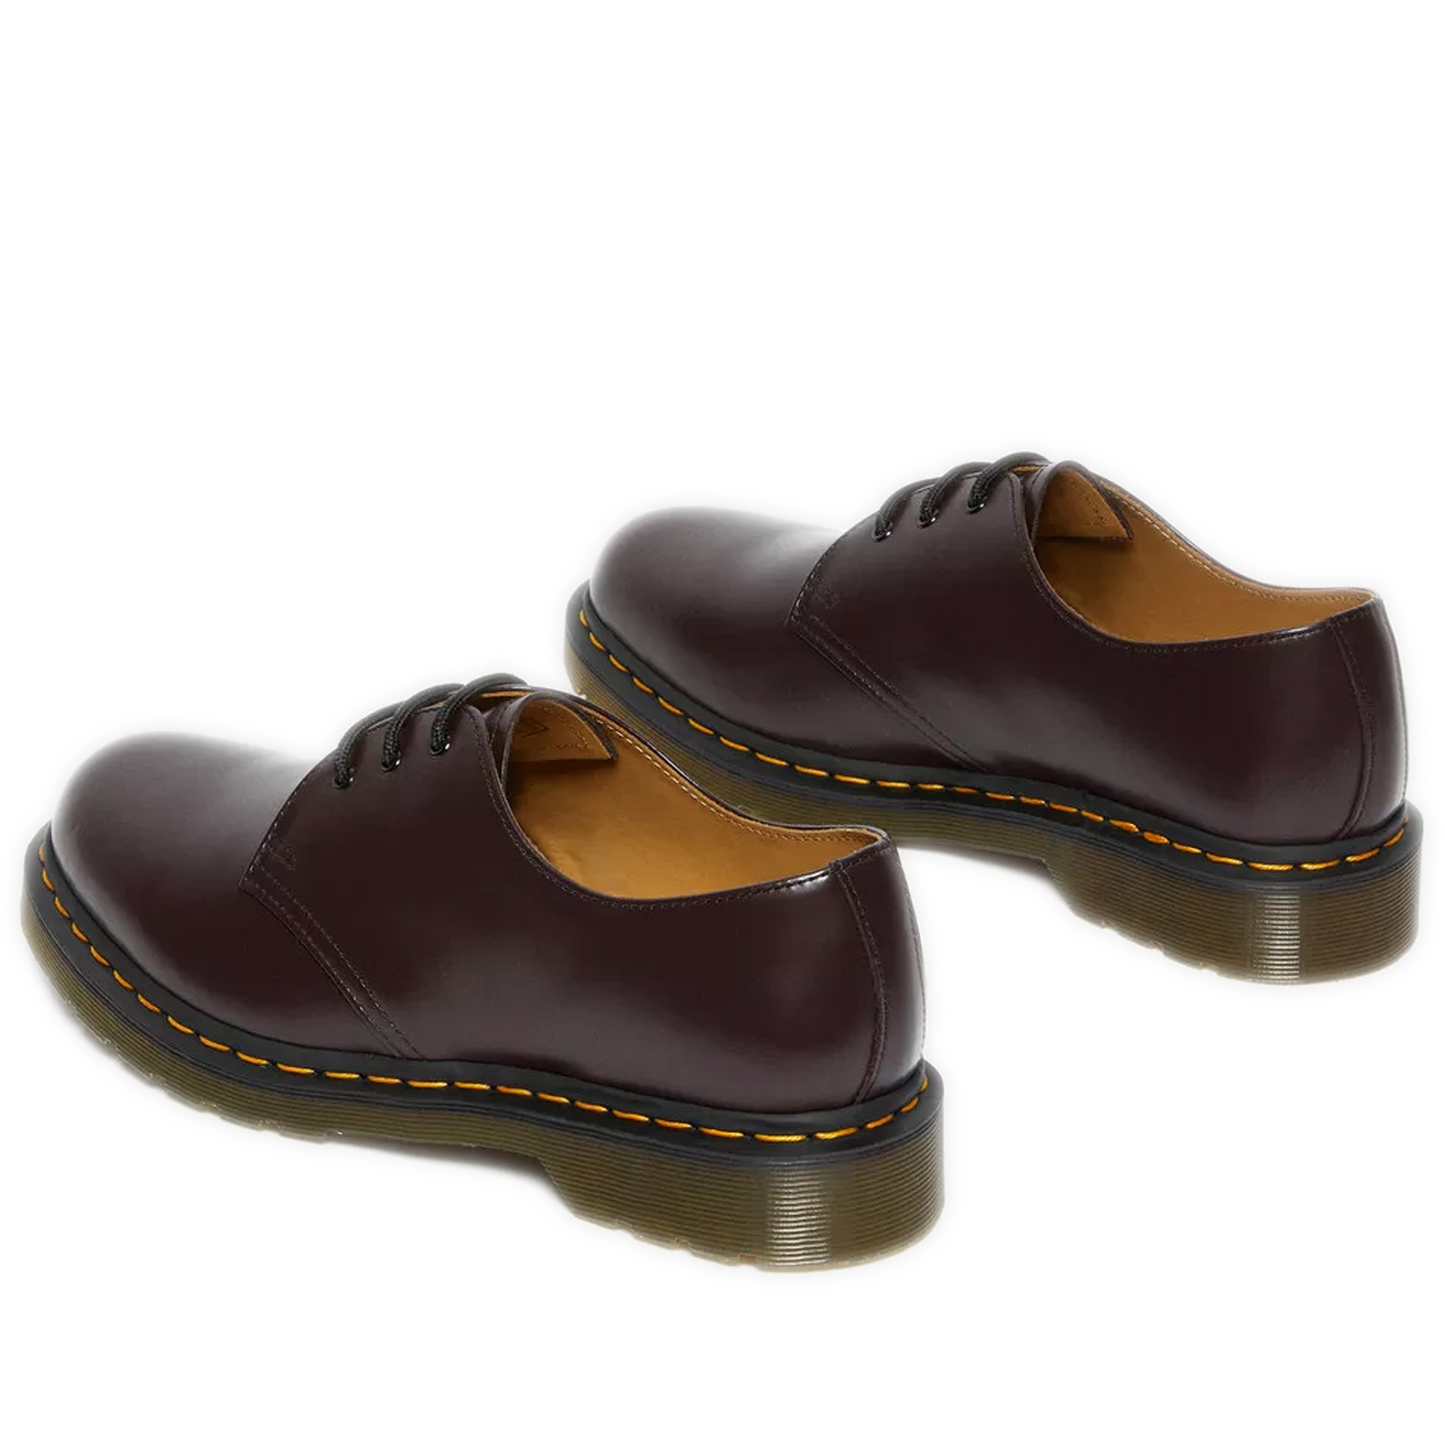 Men's Dr. Martens  1461 Smooth Leather Oxford Shoes - Burgundy Smooth